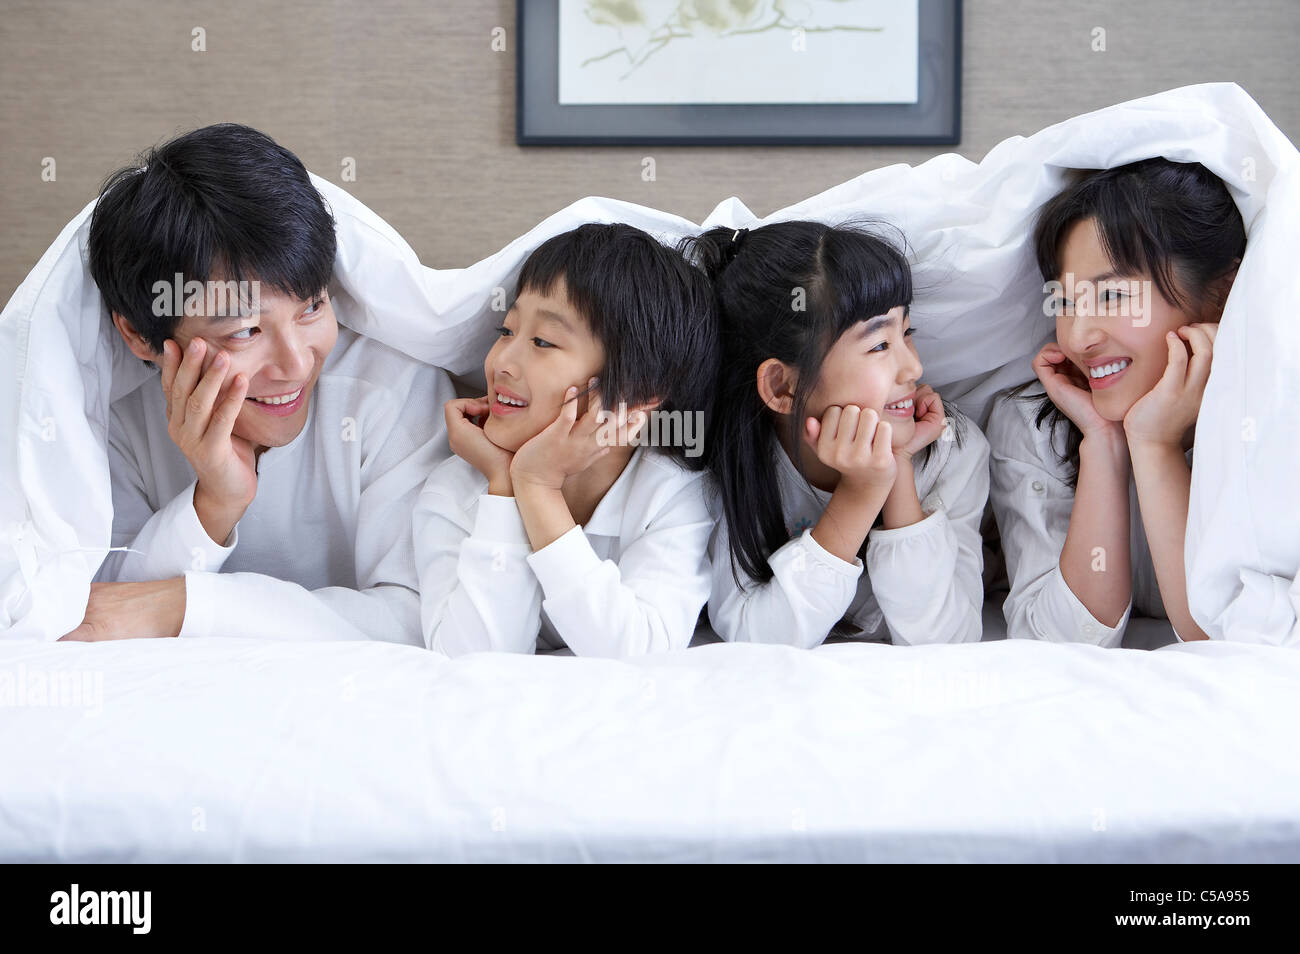 Close-up of family smiling on a bed Banque D'Images